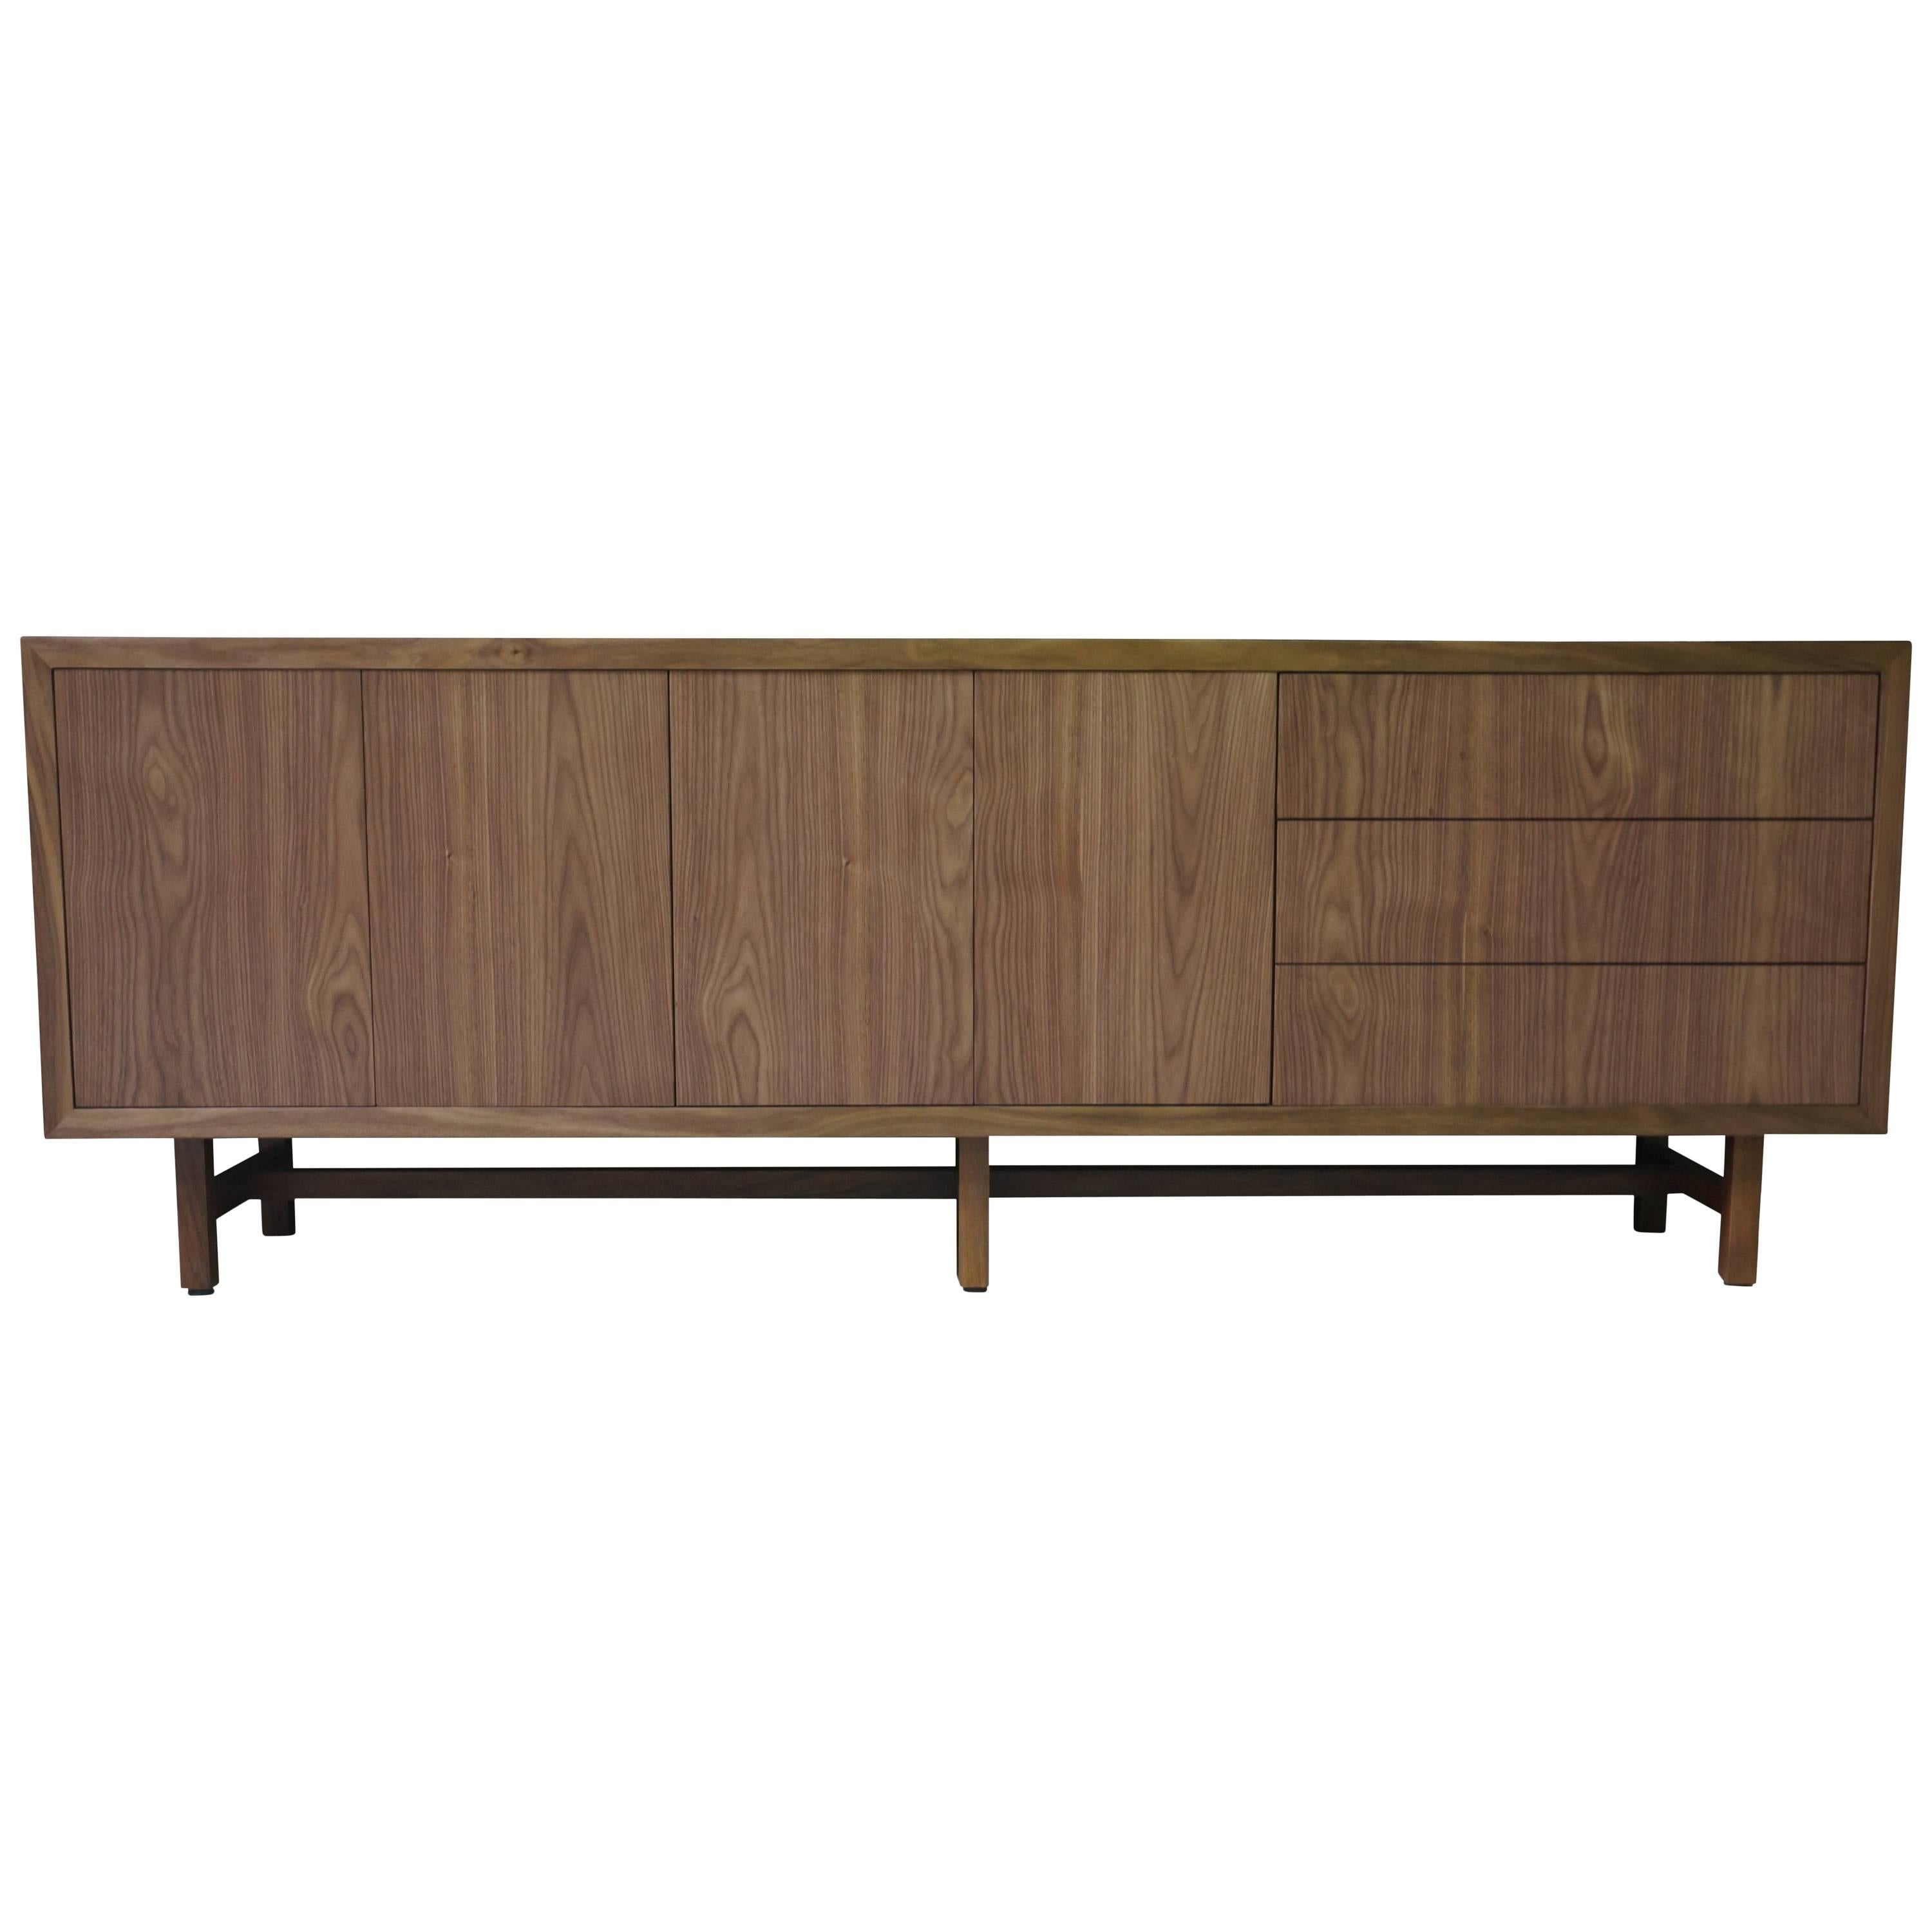 The Salvatore Credenza can be made in any size, with any combination of drawers and doors. Shown here in Argentine Rosewood but available in any material or finish and with any style pull.